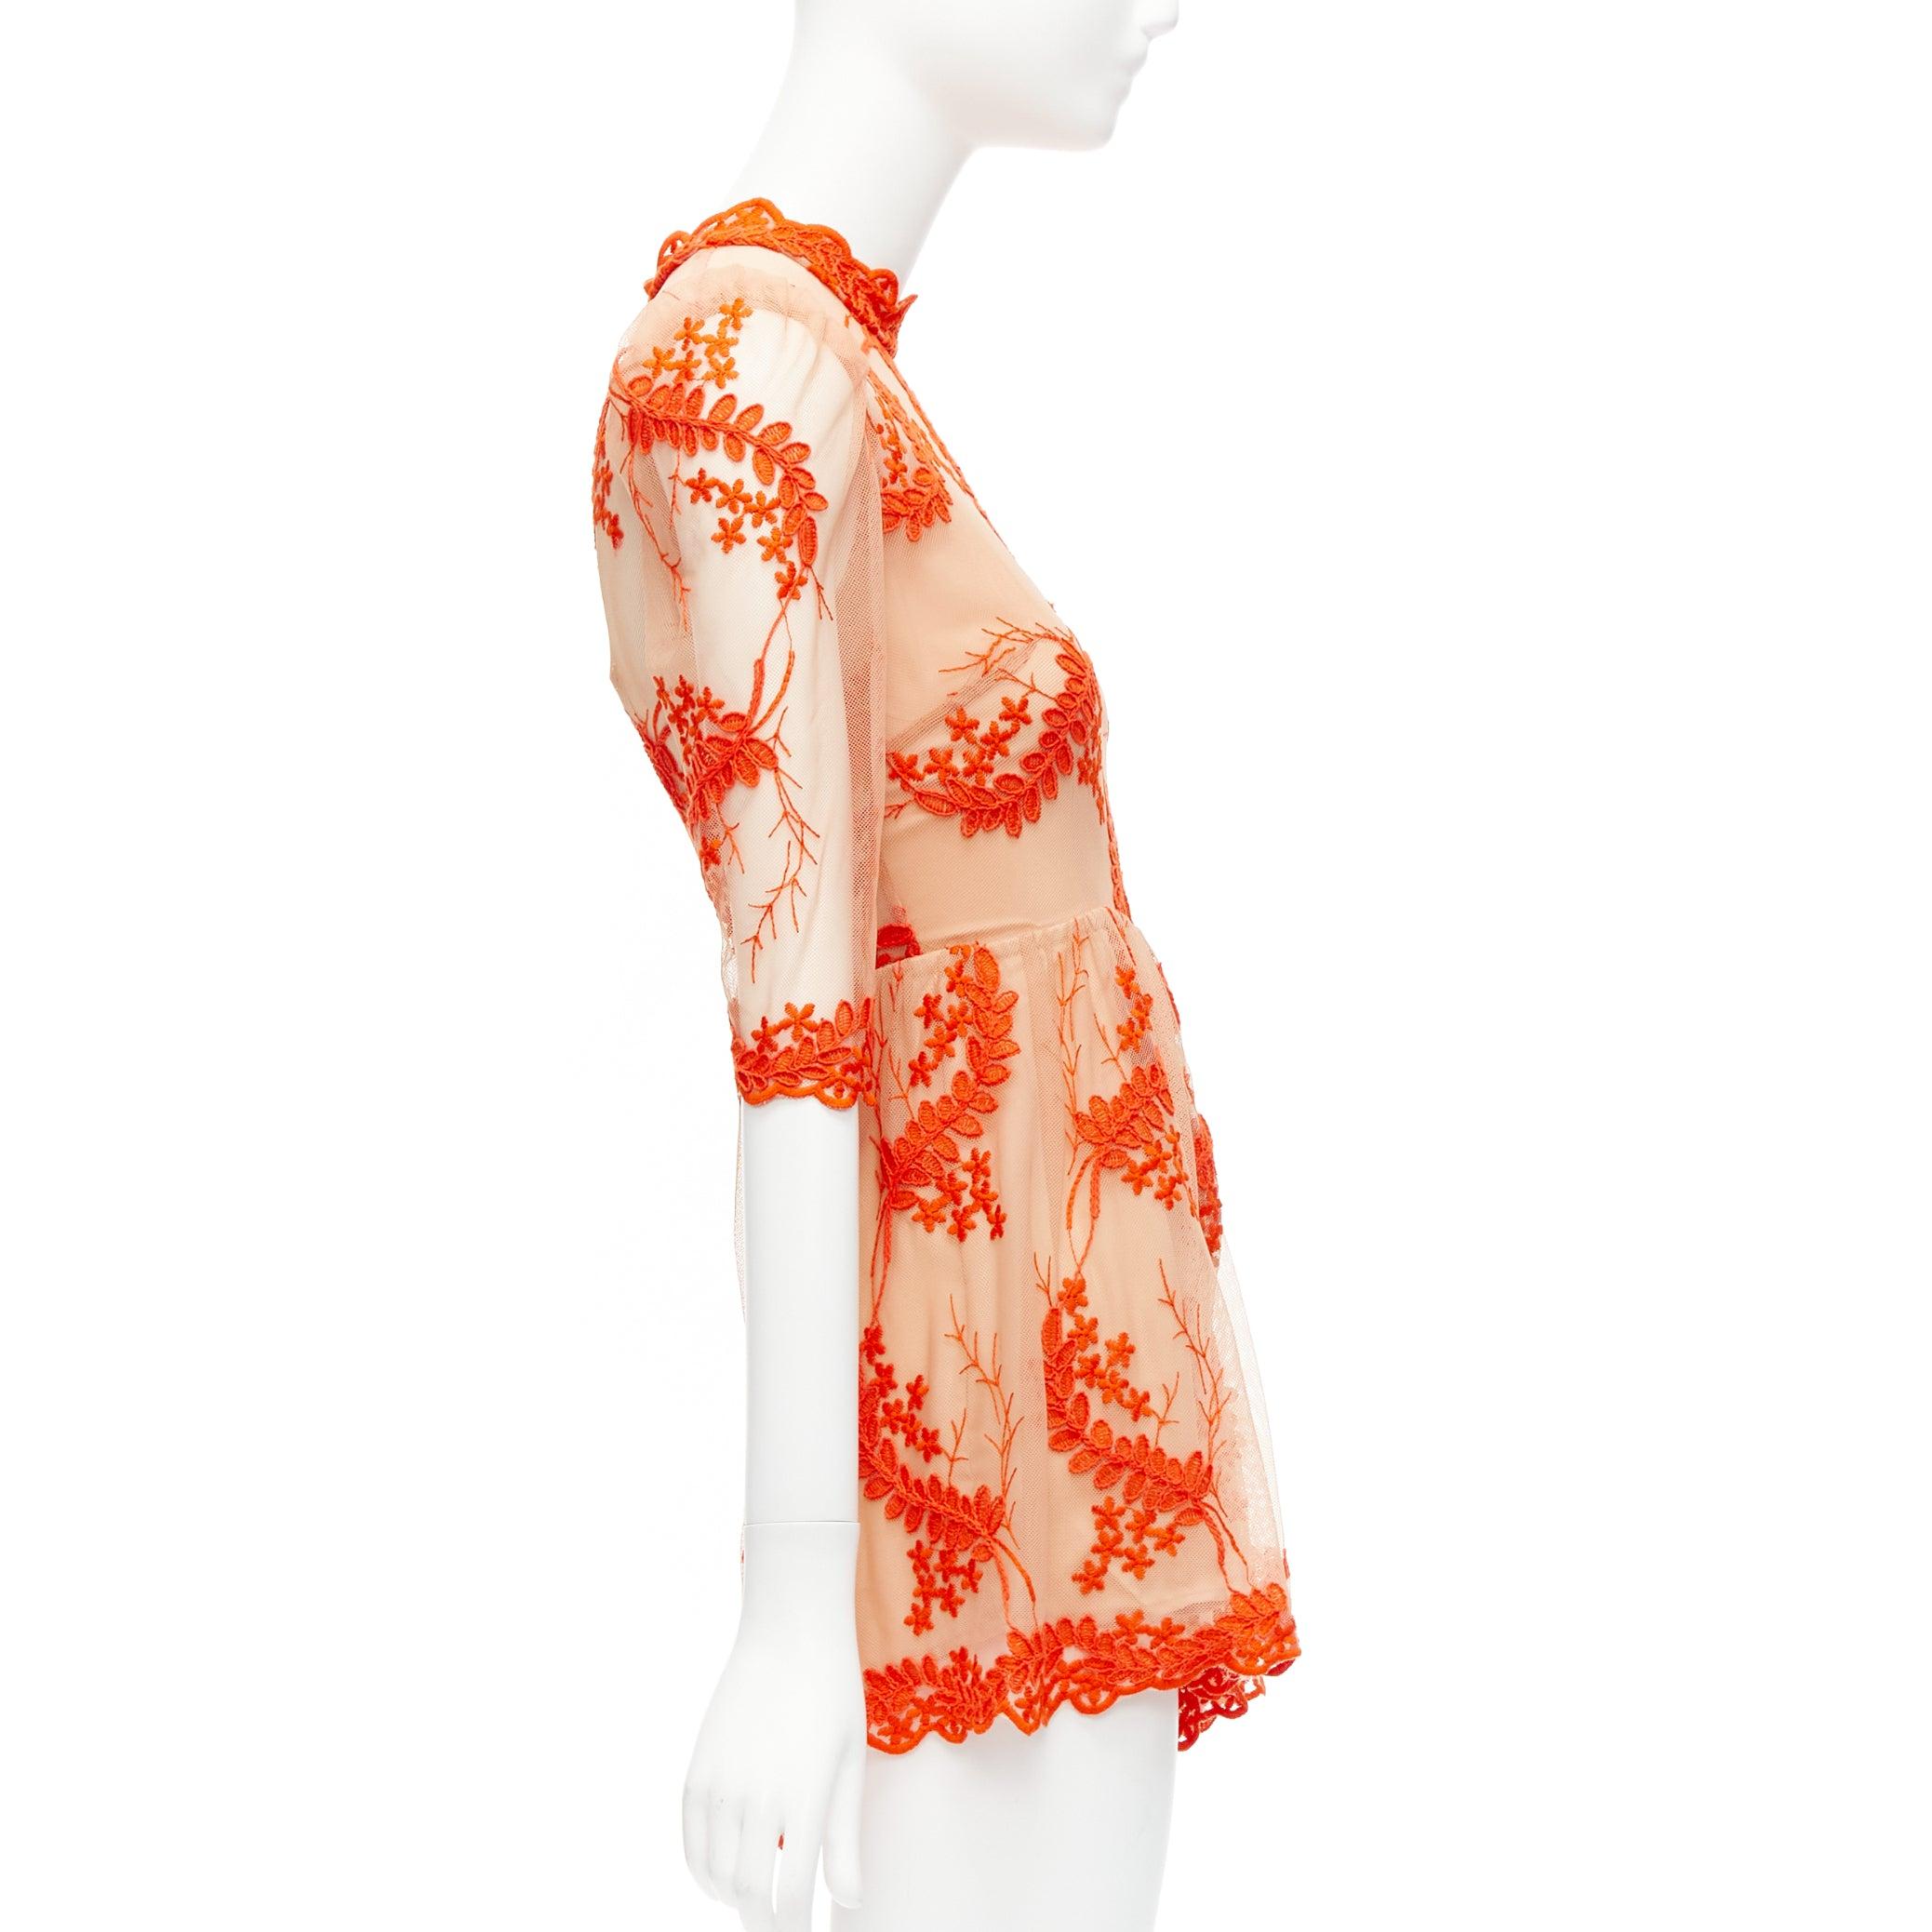 ALICE MCCALL Honeymoon orange lace nude sheer overlay lined romper US6 M In Good Condition For Sale In Hong Kong, NT